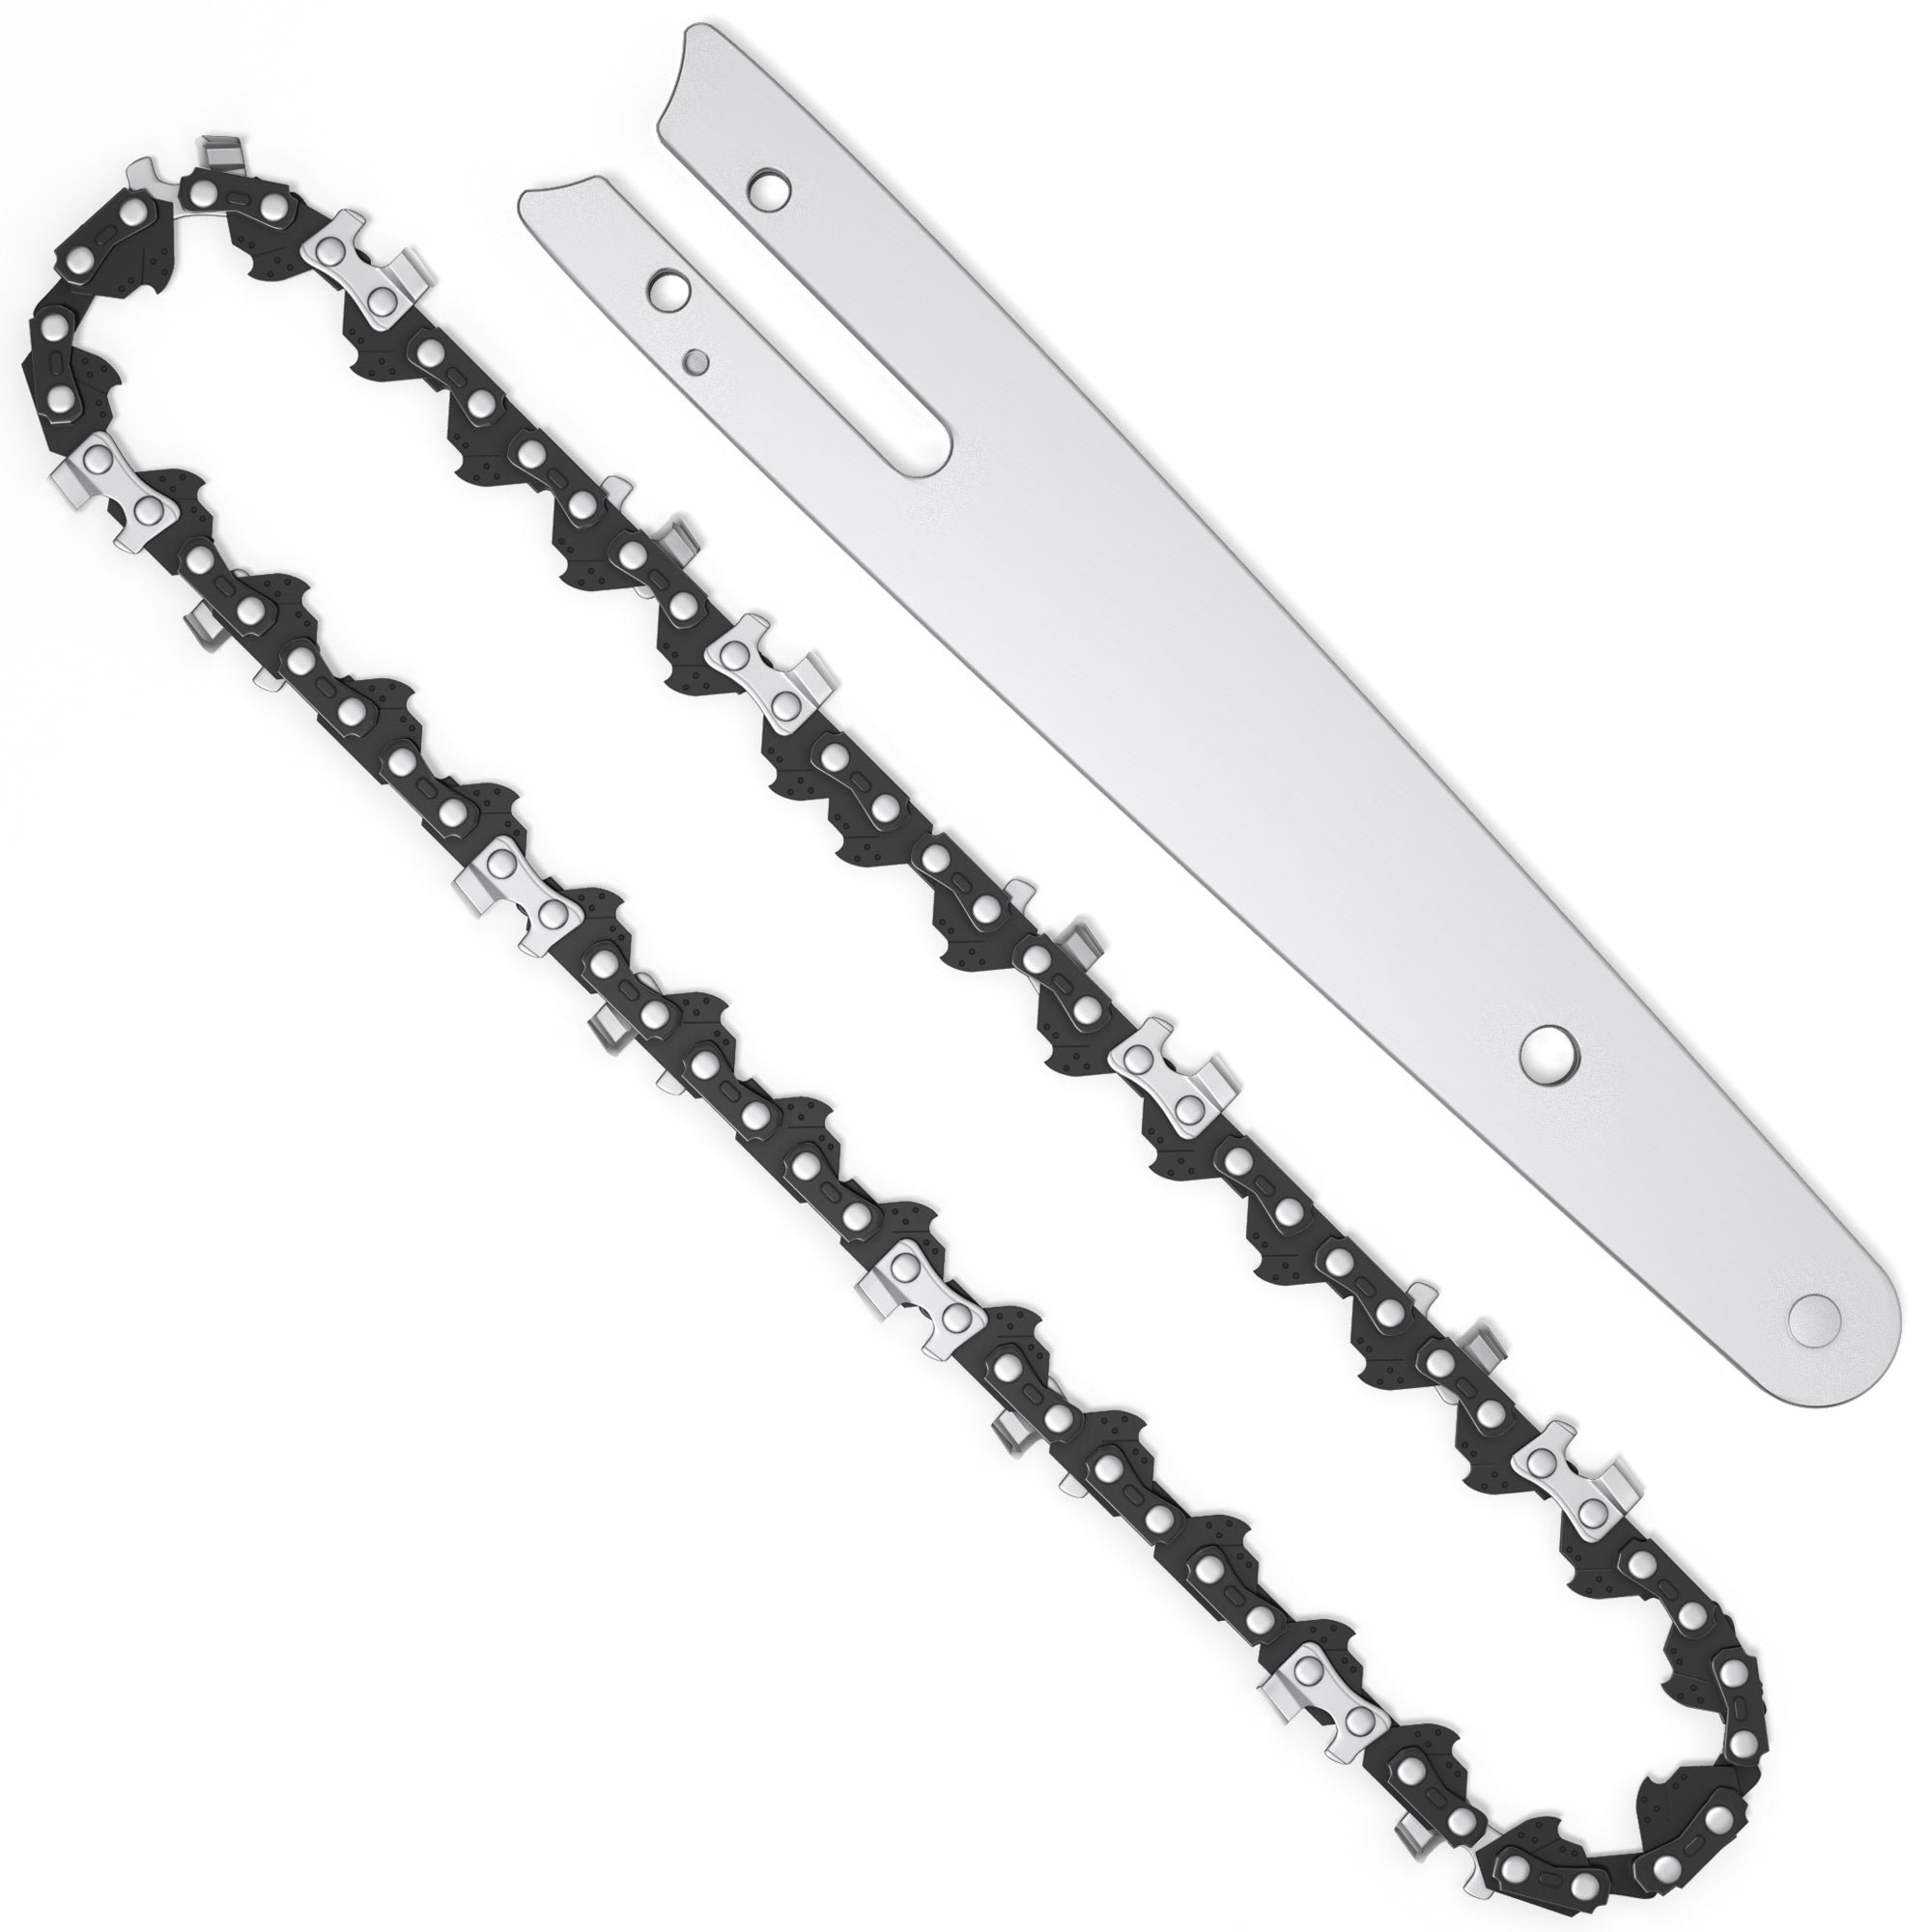 Replacement Chain and Guide Bar - Imoum